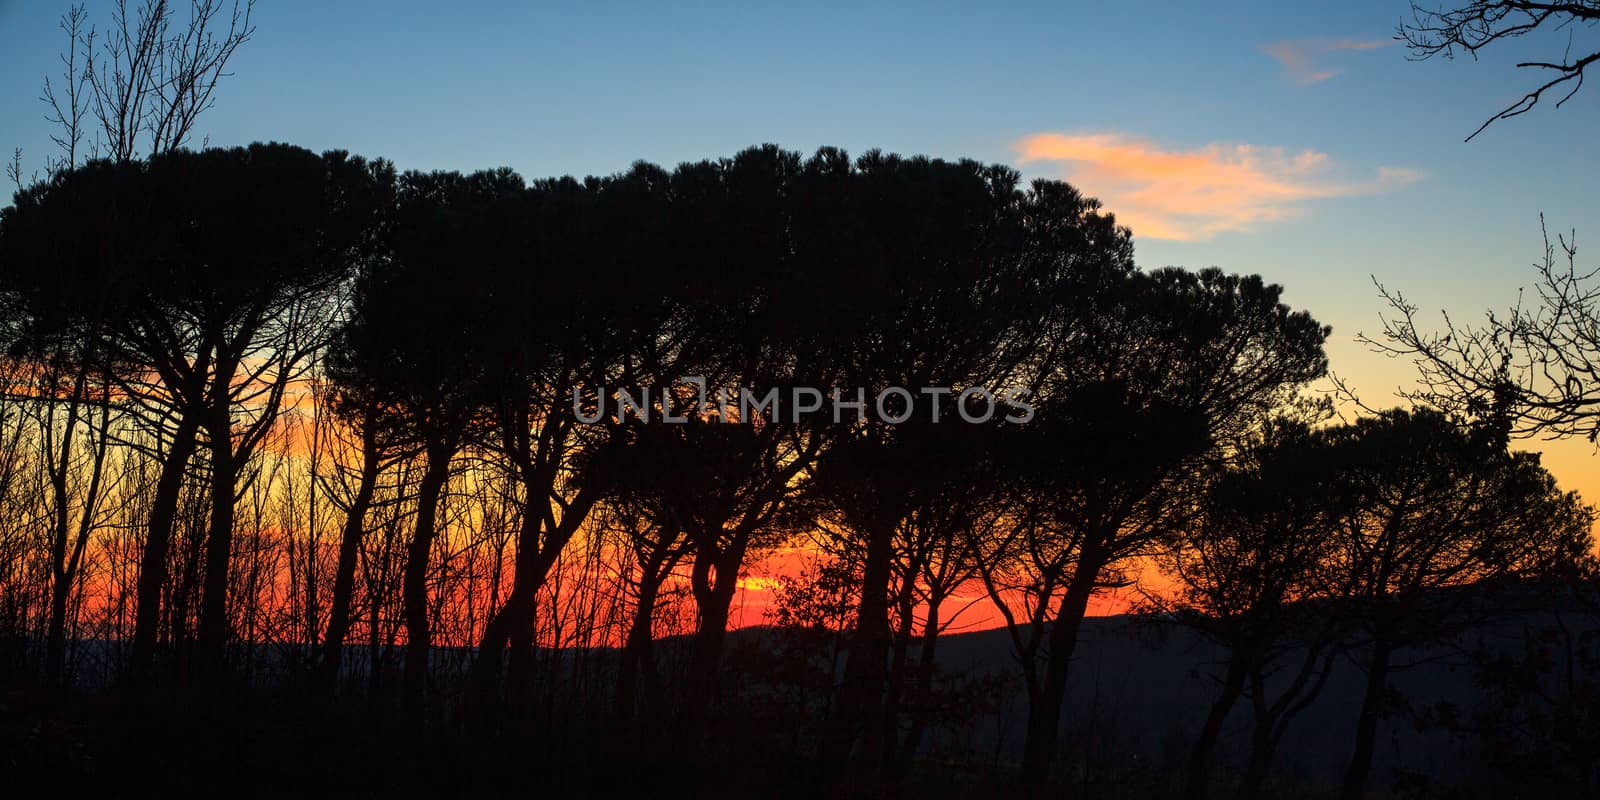 View of silhouette of trees at sunset